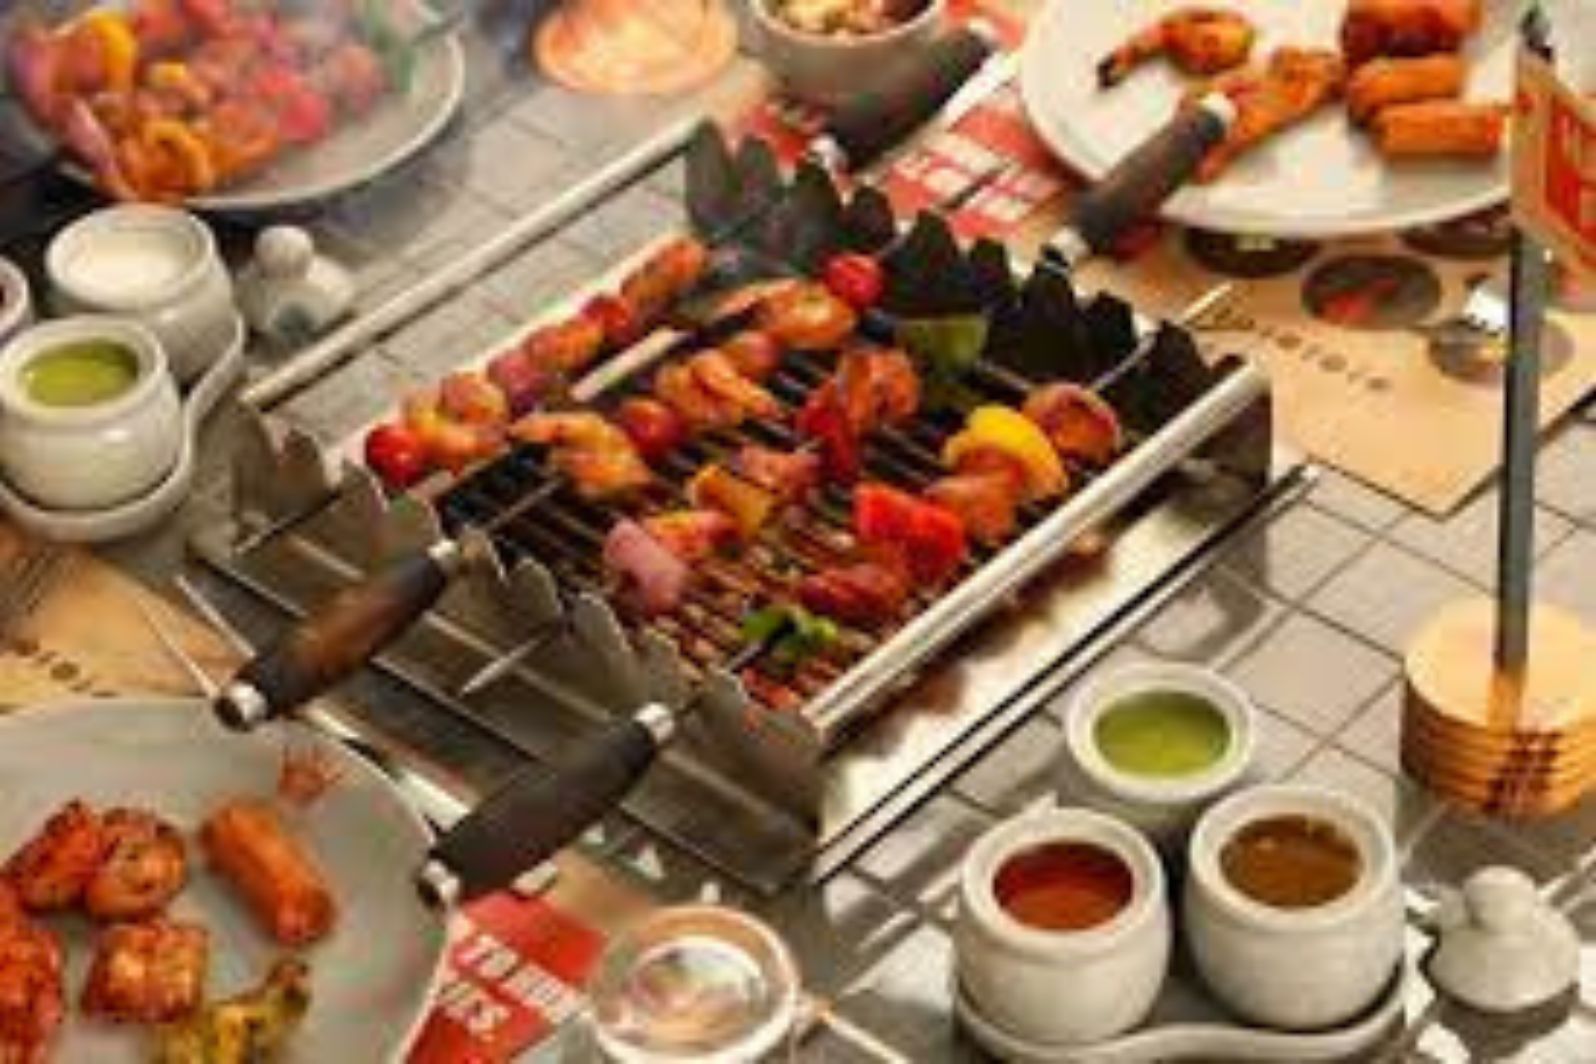 barbeque nation sector 26 chandigarh